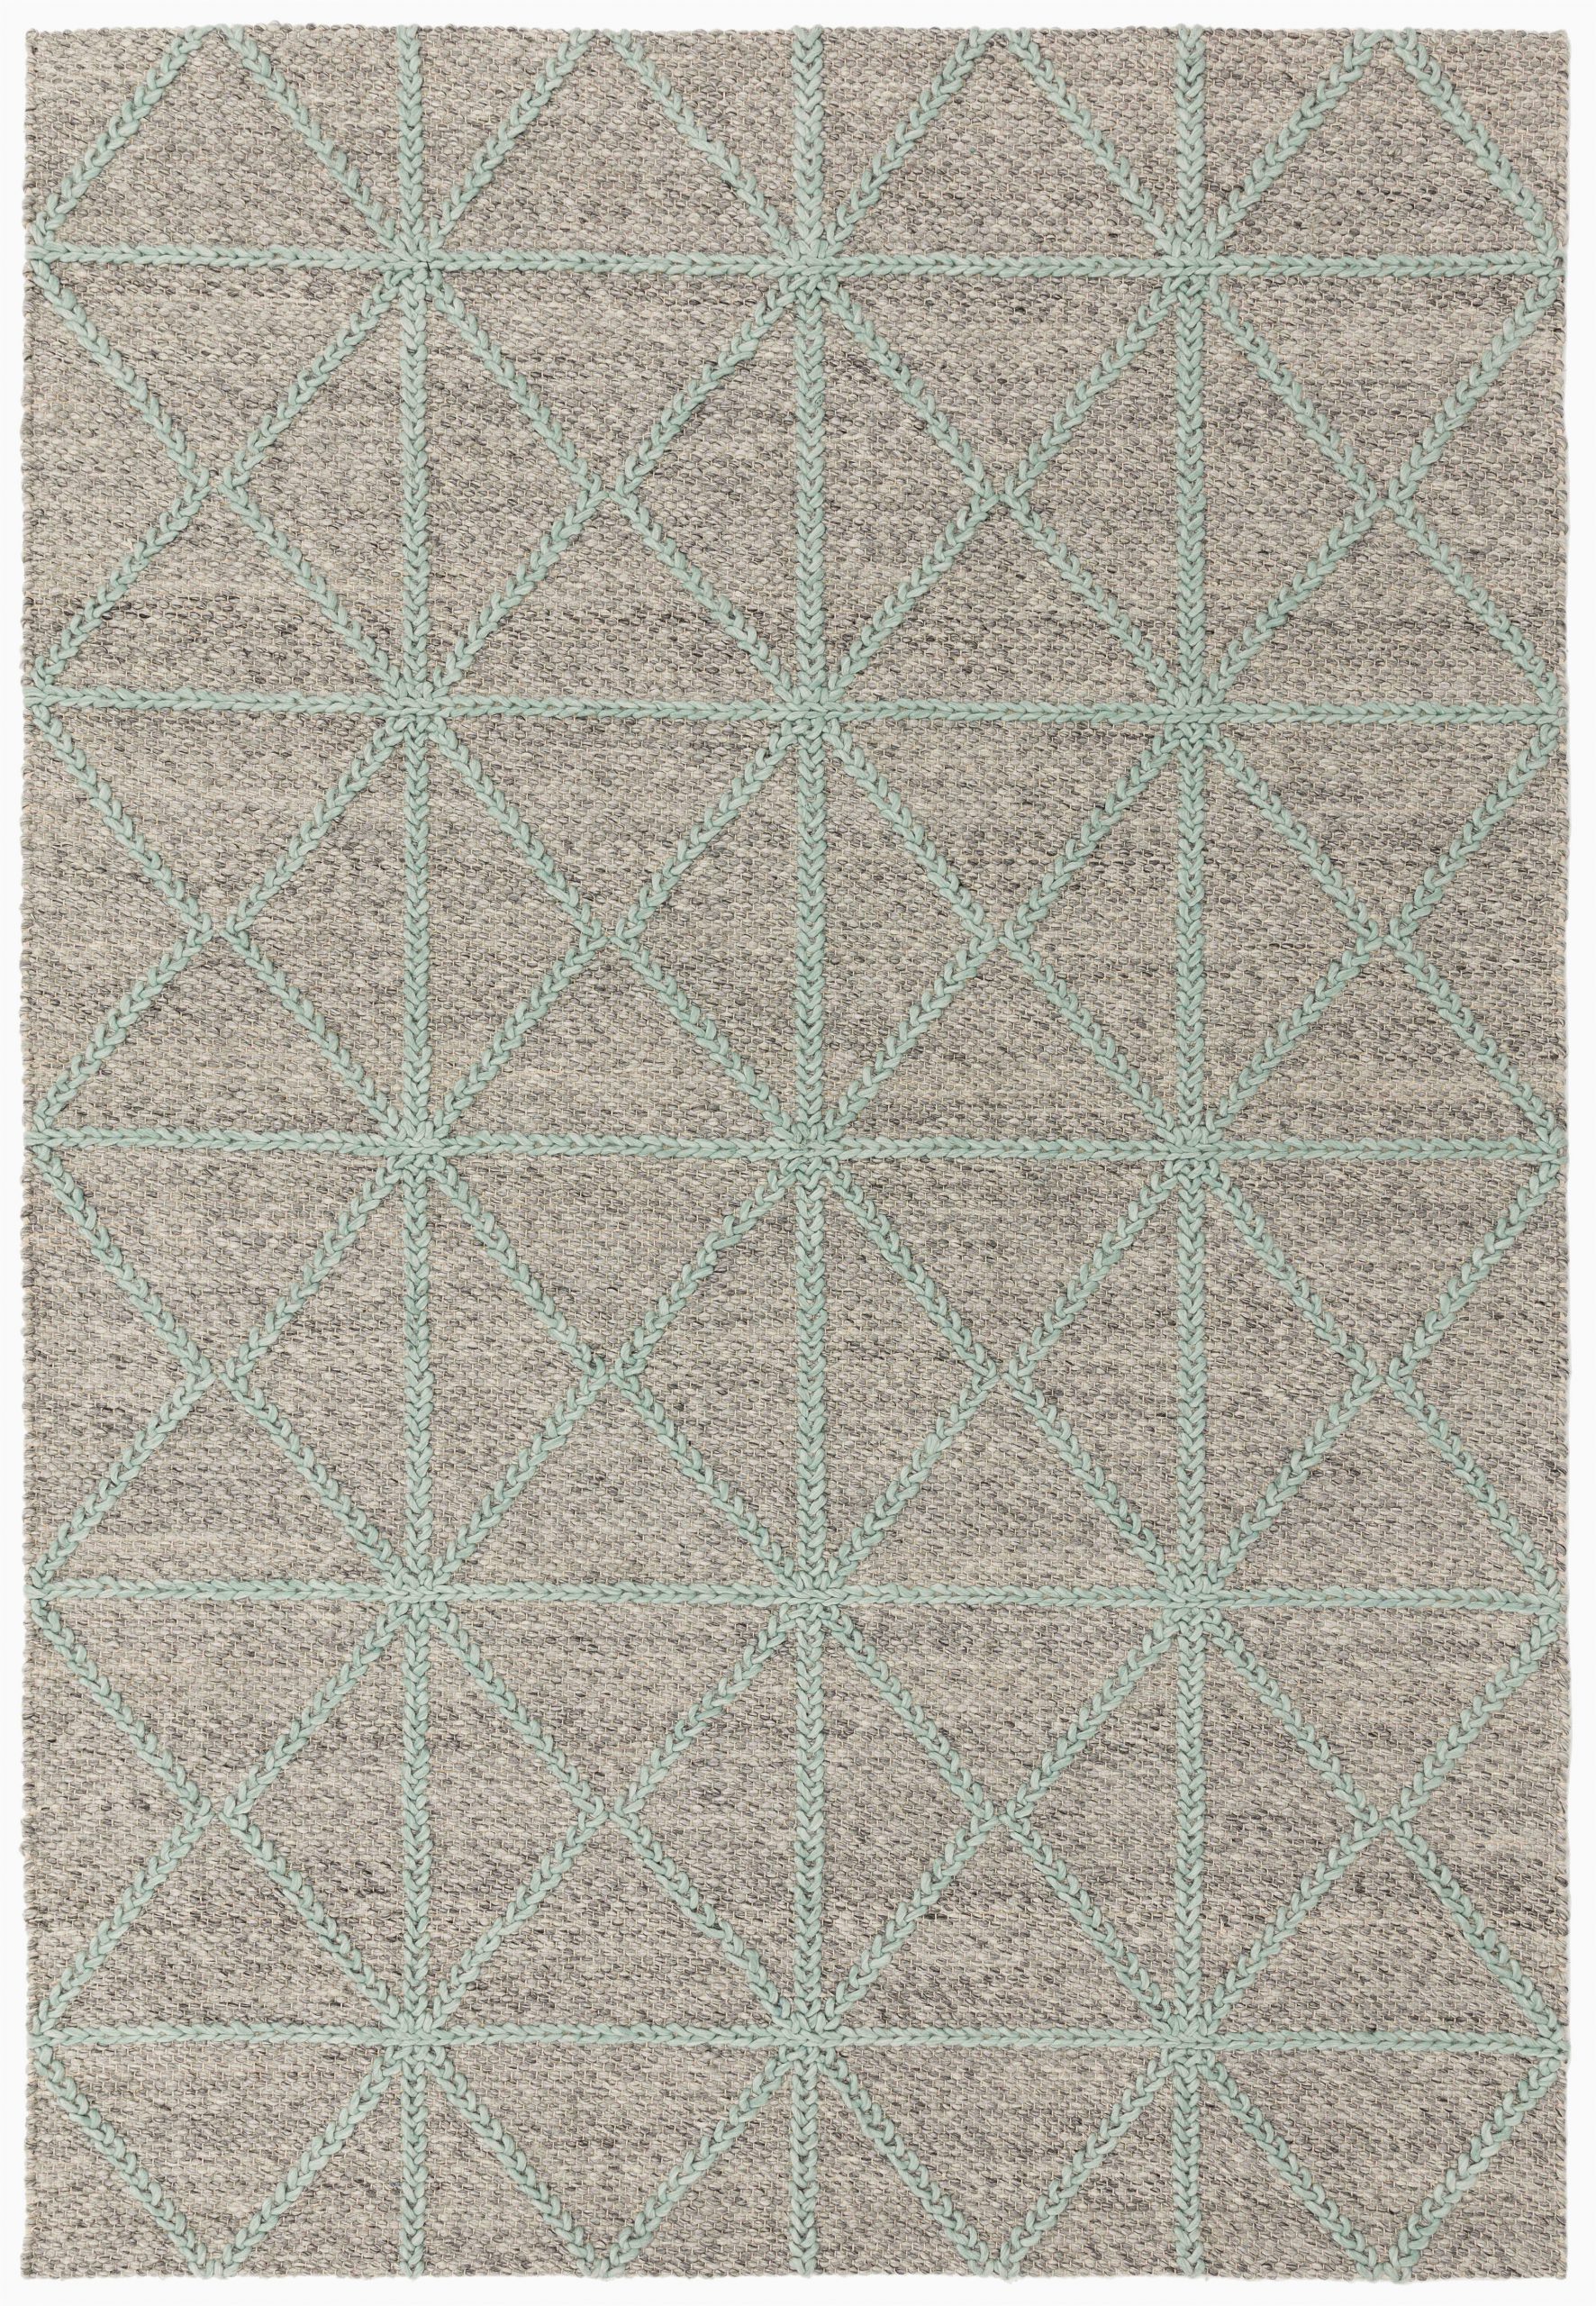 Mint Green and Brown area Rug Prism Mint Geometric Rug